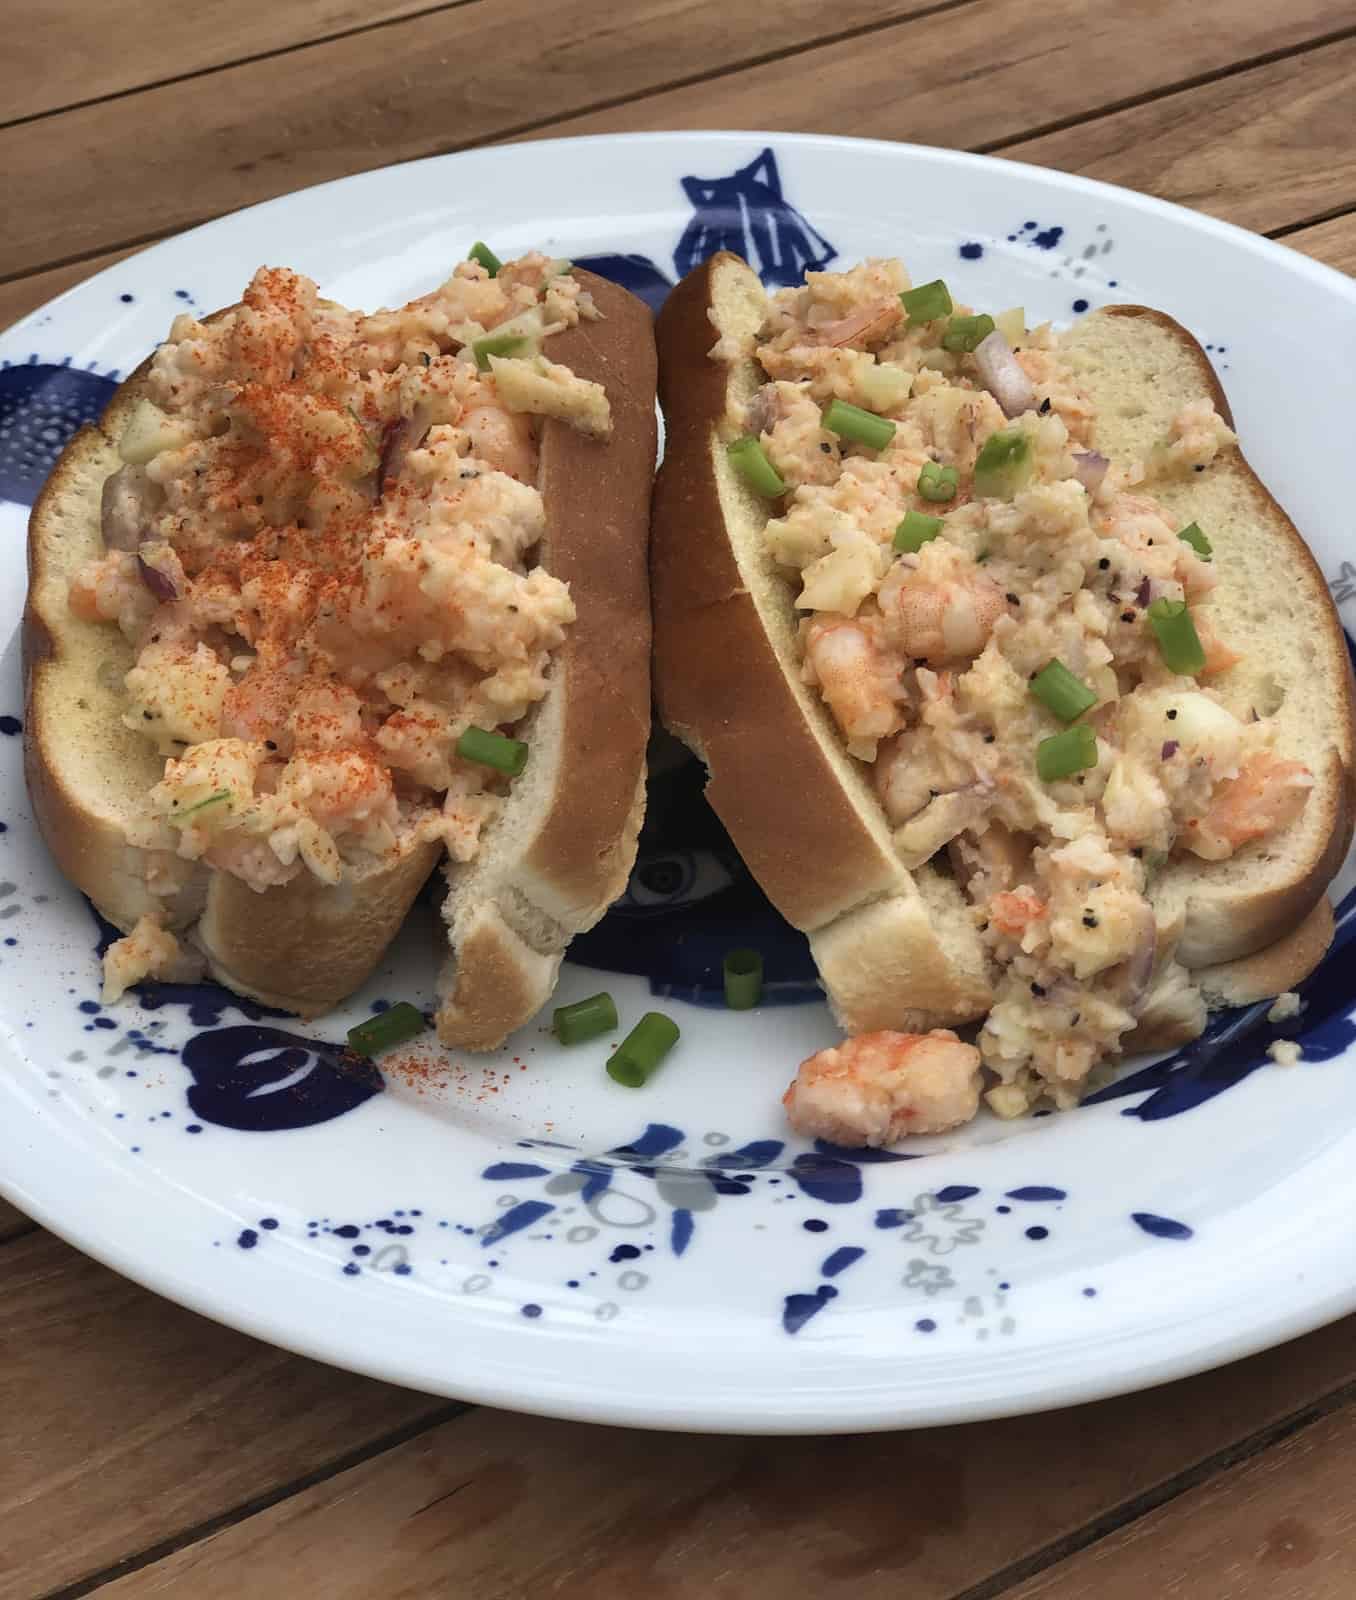 2 Shrimp Salad Sandwiches on hot dogs buns on a white and blue plate on a wooden table